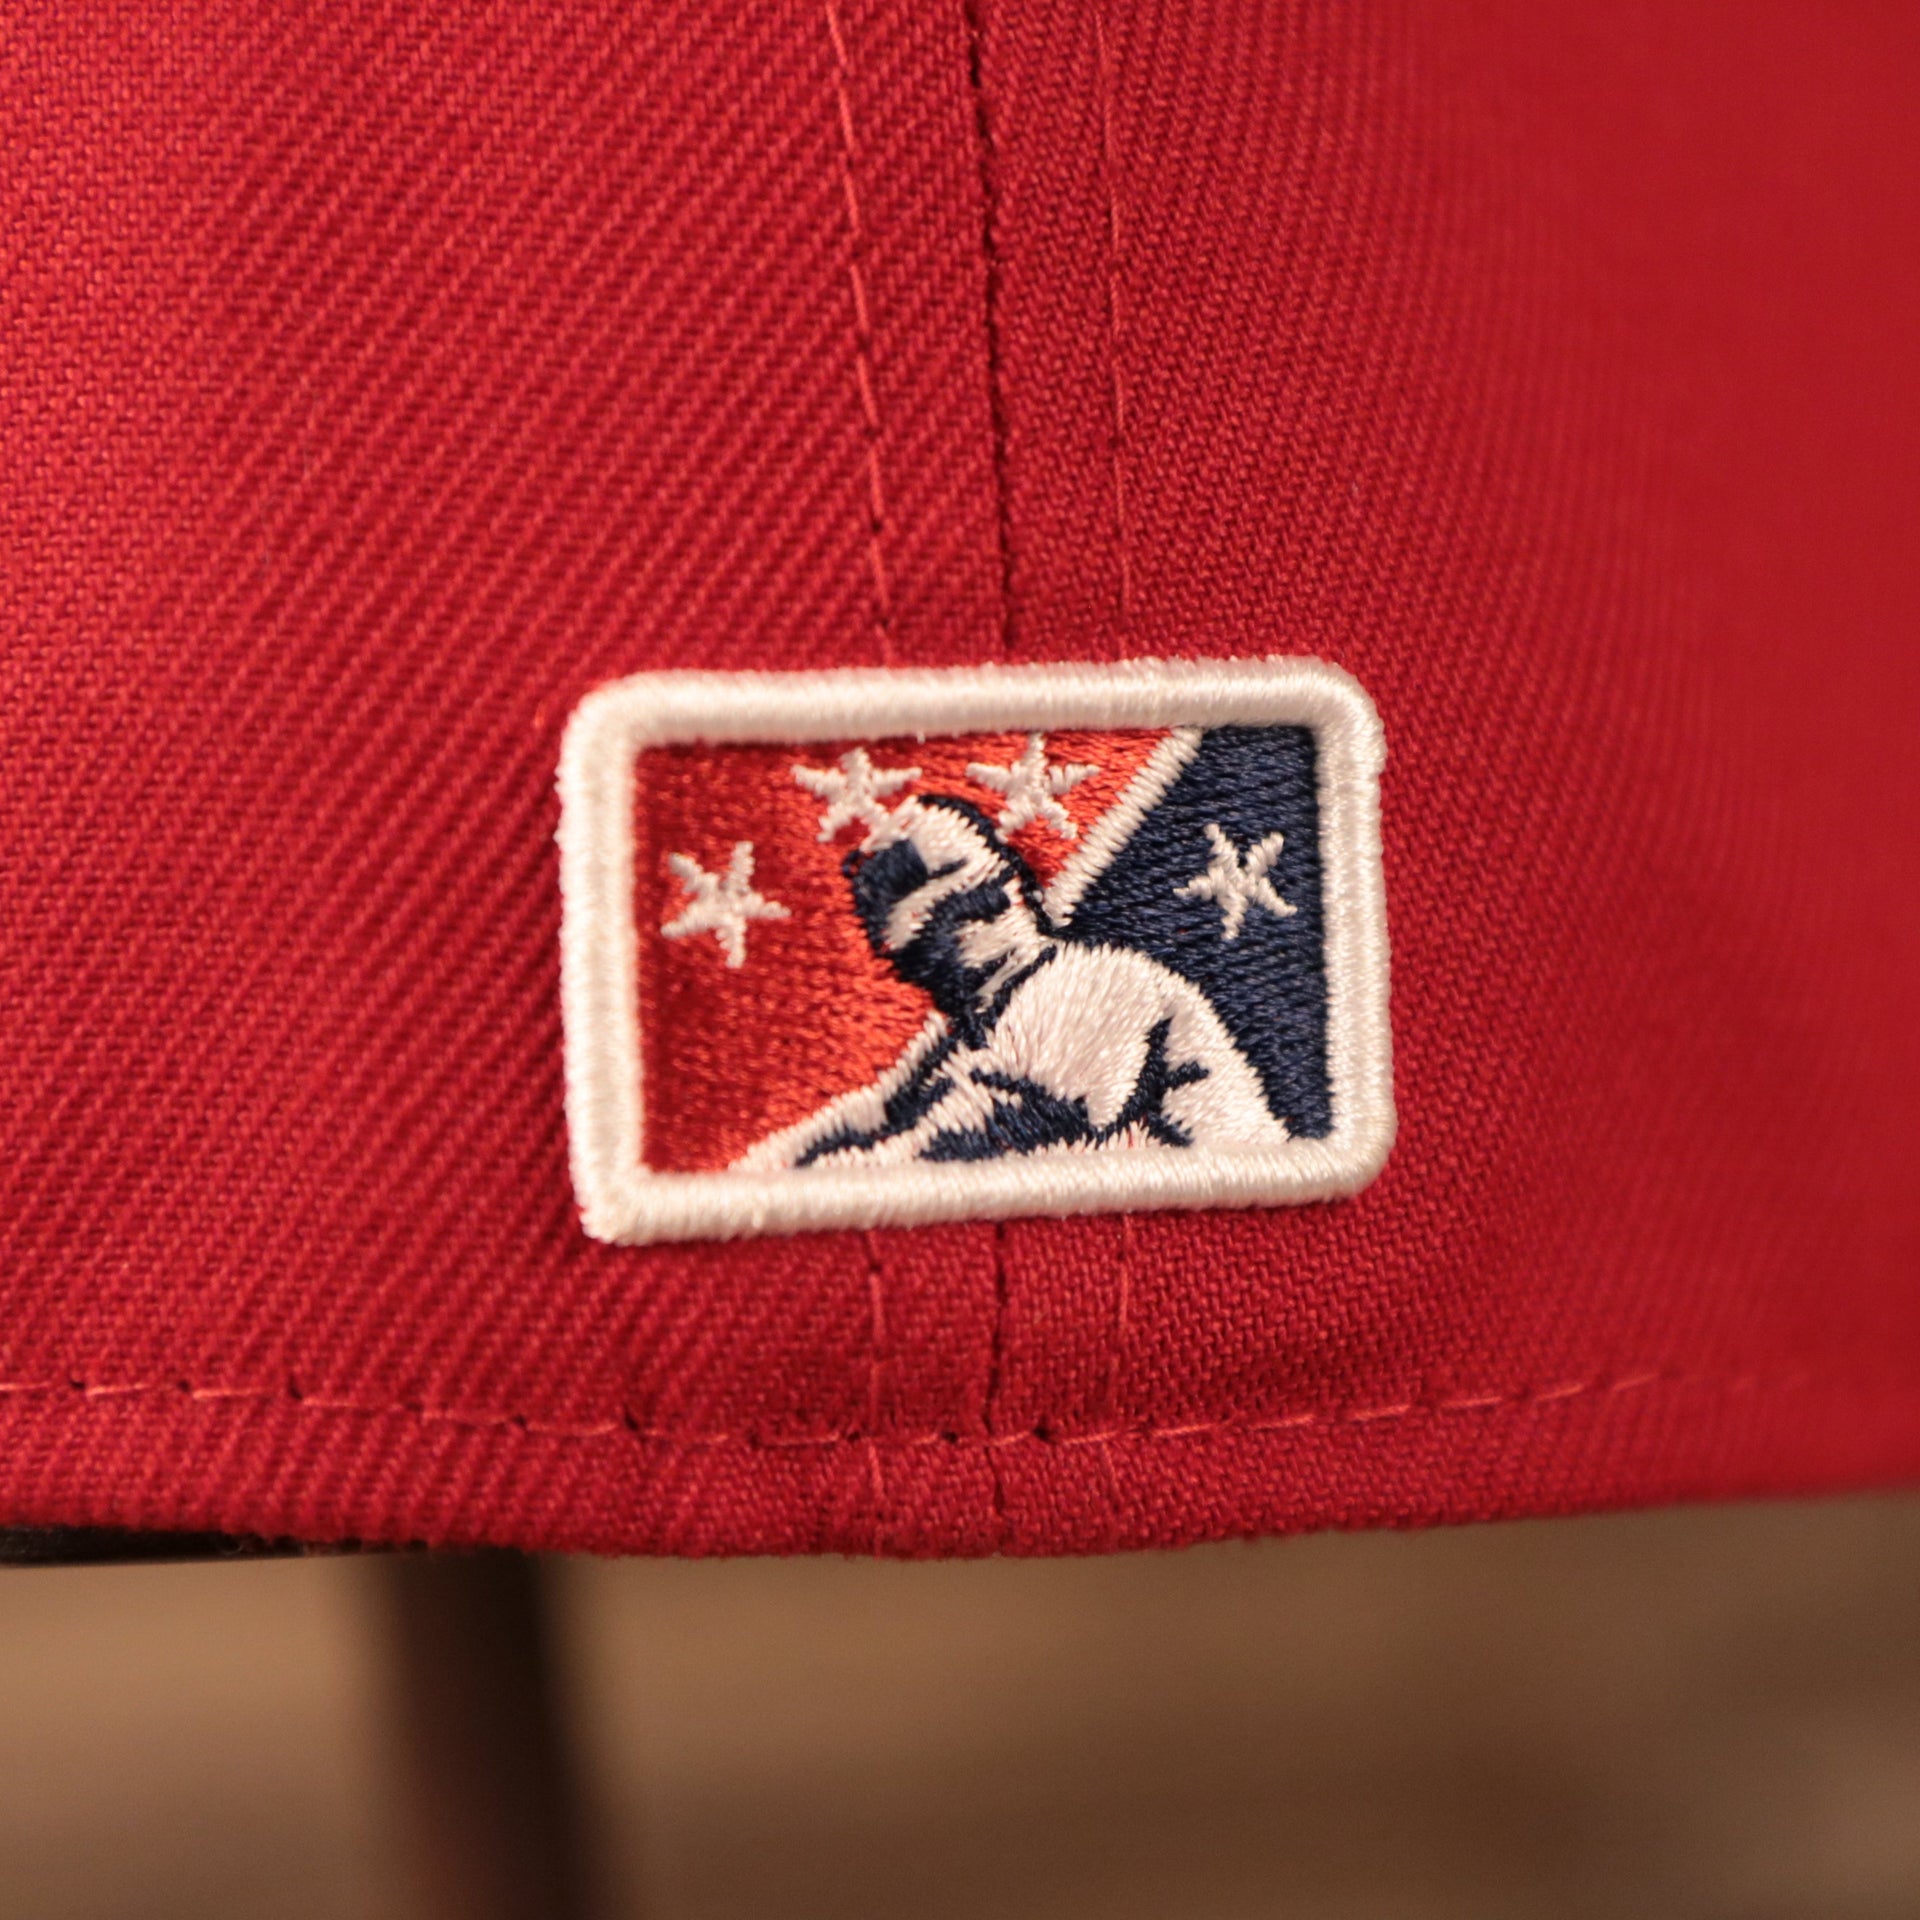 The backside of the red MiLB copa hat for the Lehigh Valley Iron Pigs has the Minor League Baseball logo.